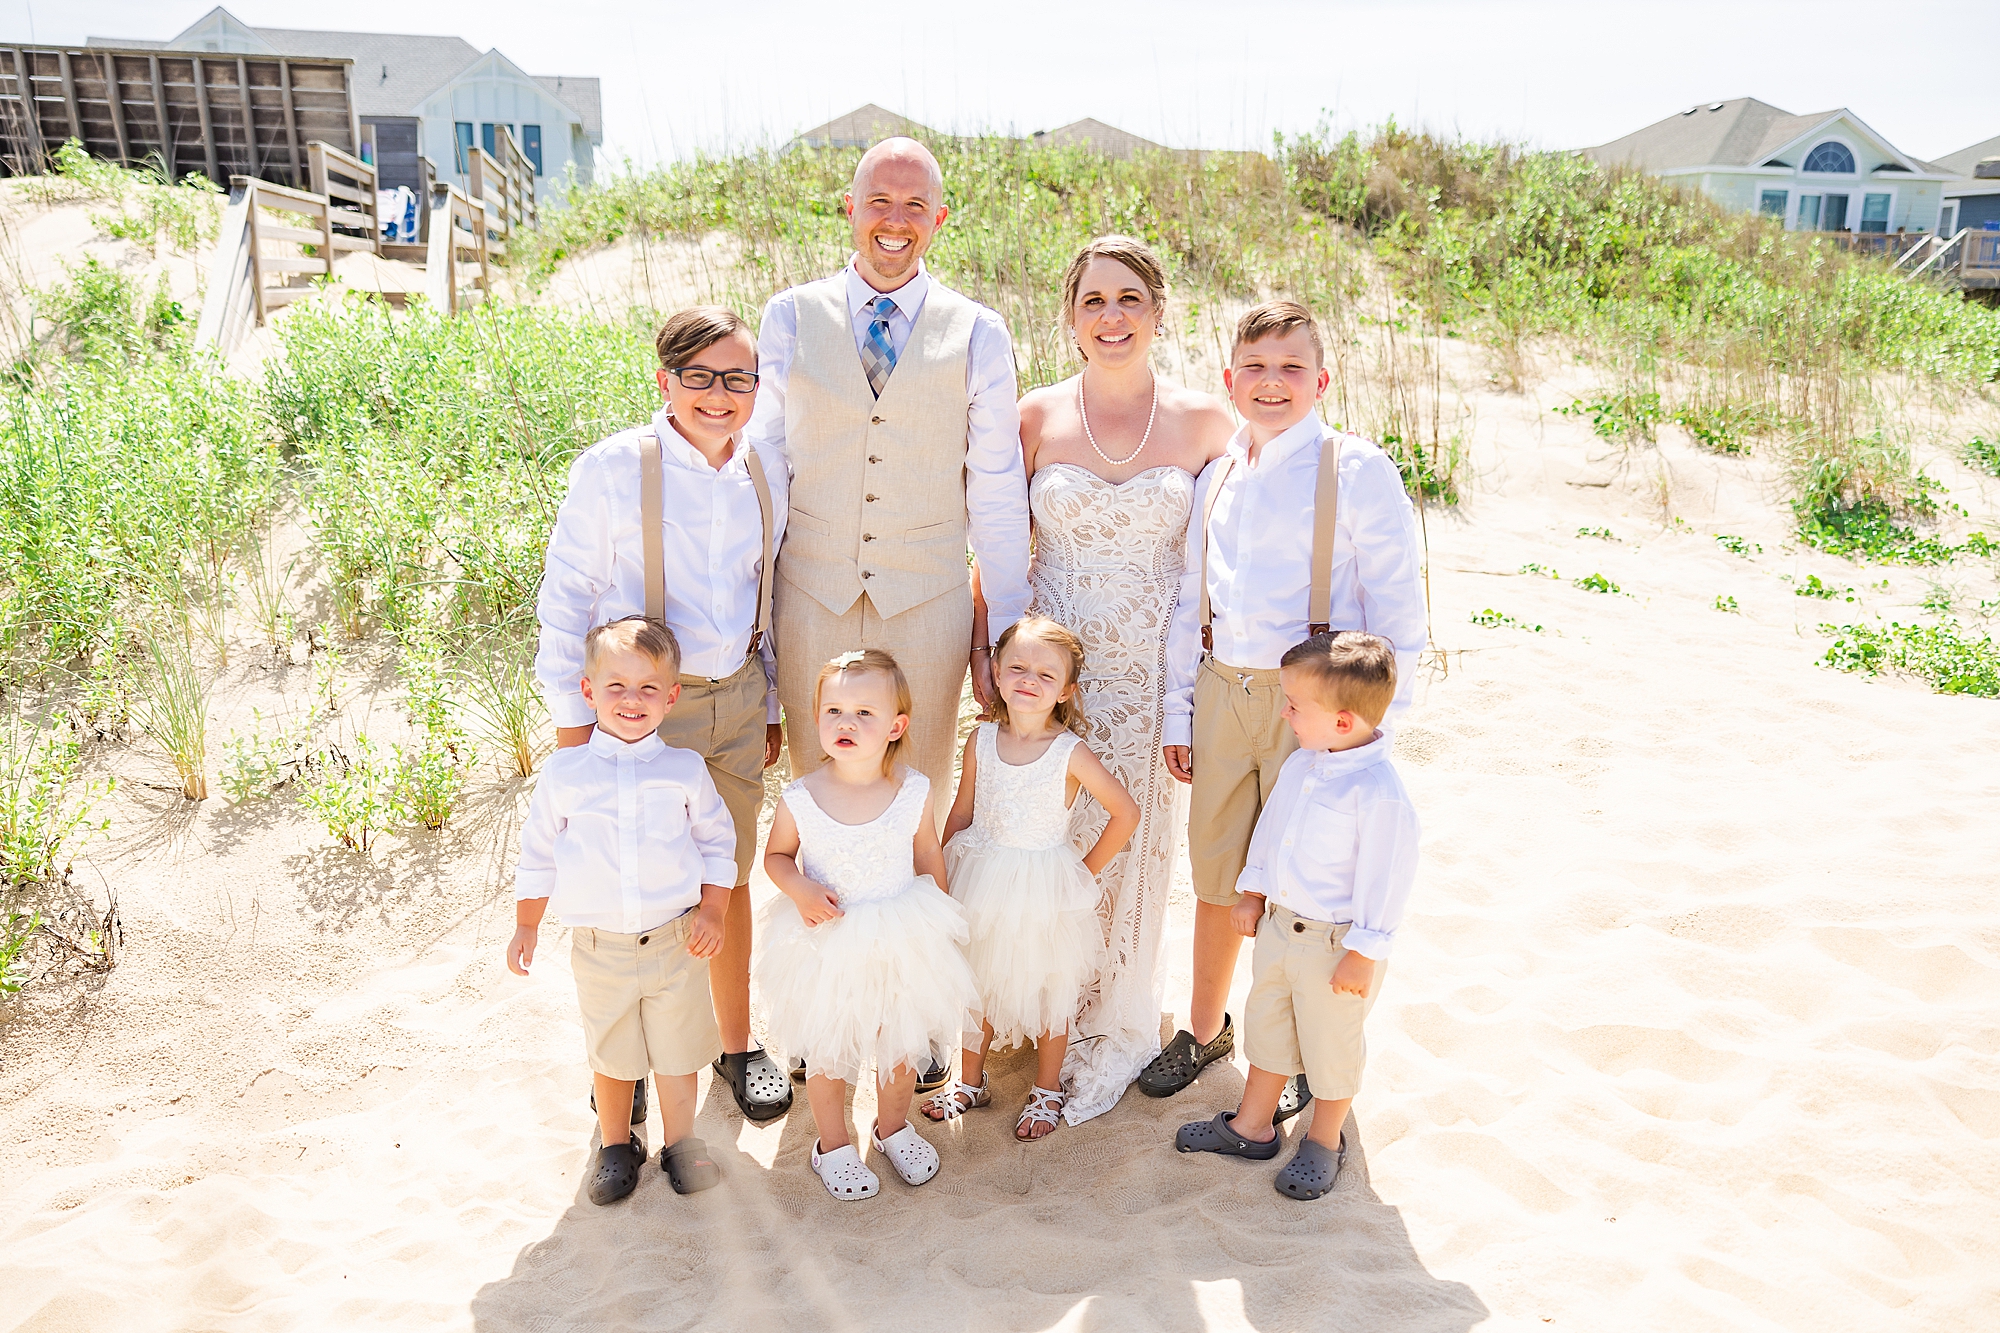 bride and groom pose with flower girls and ring bearers for beach wedding